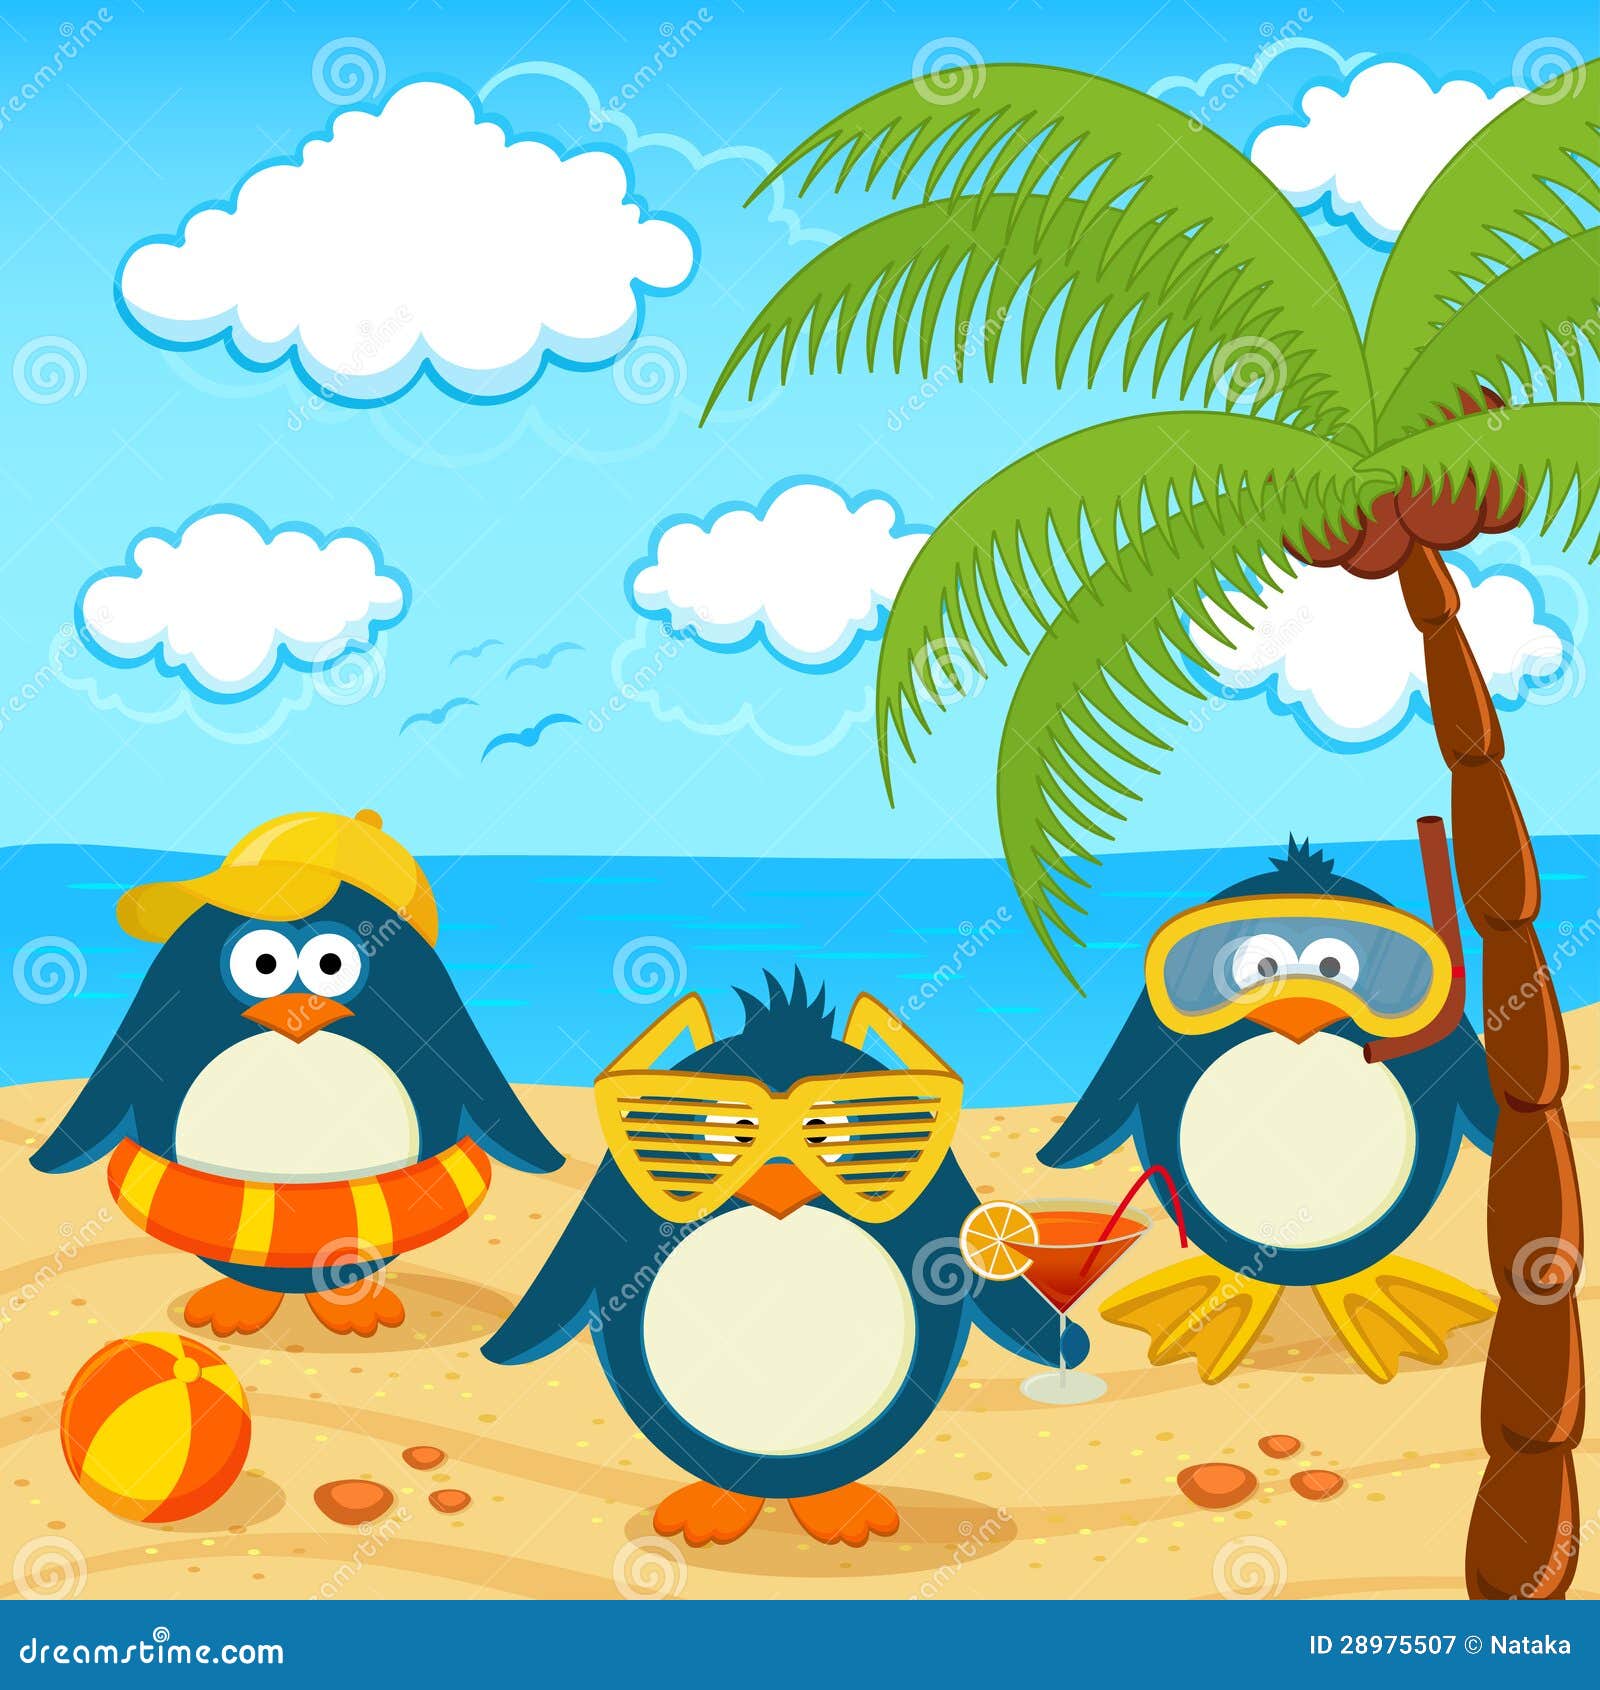 Penguins on the Beach Vector Stock Vector - Illustration of party ...